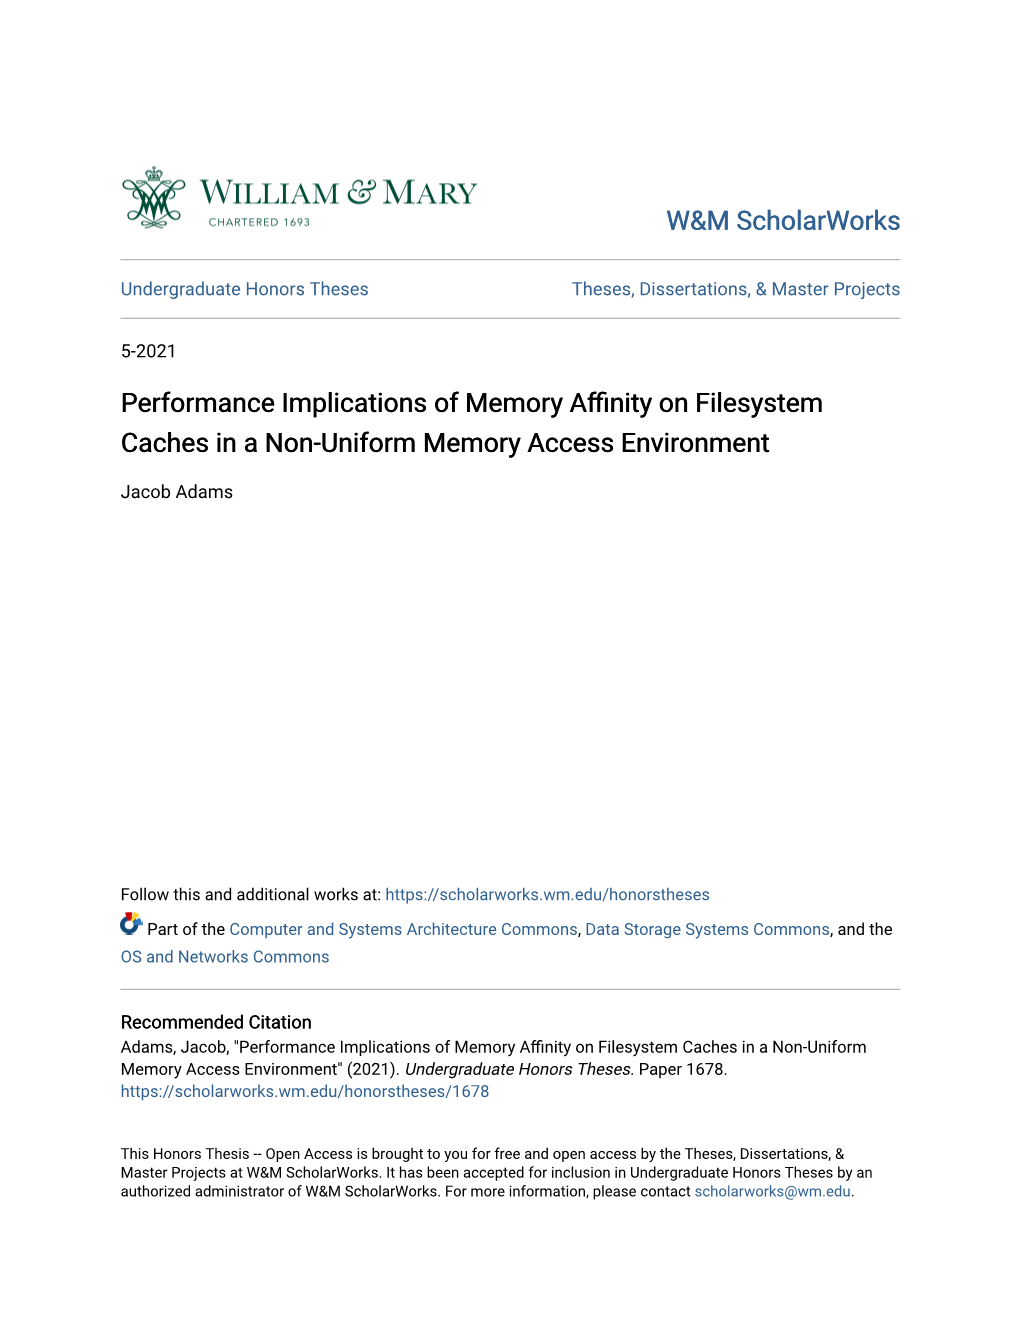 Performance Implications of Memory Affinity on Filesystem Caches in a Non-Uniform Memory Access Environment